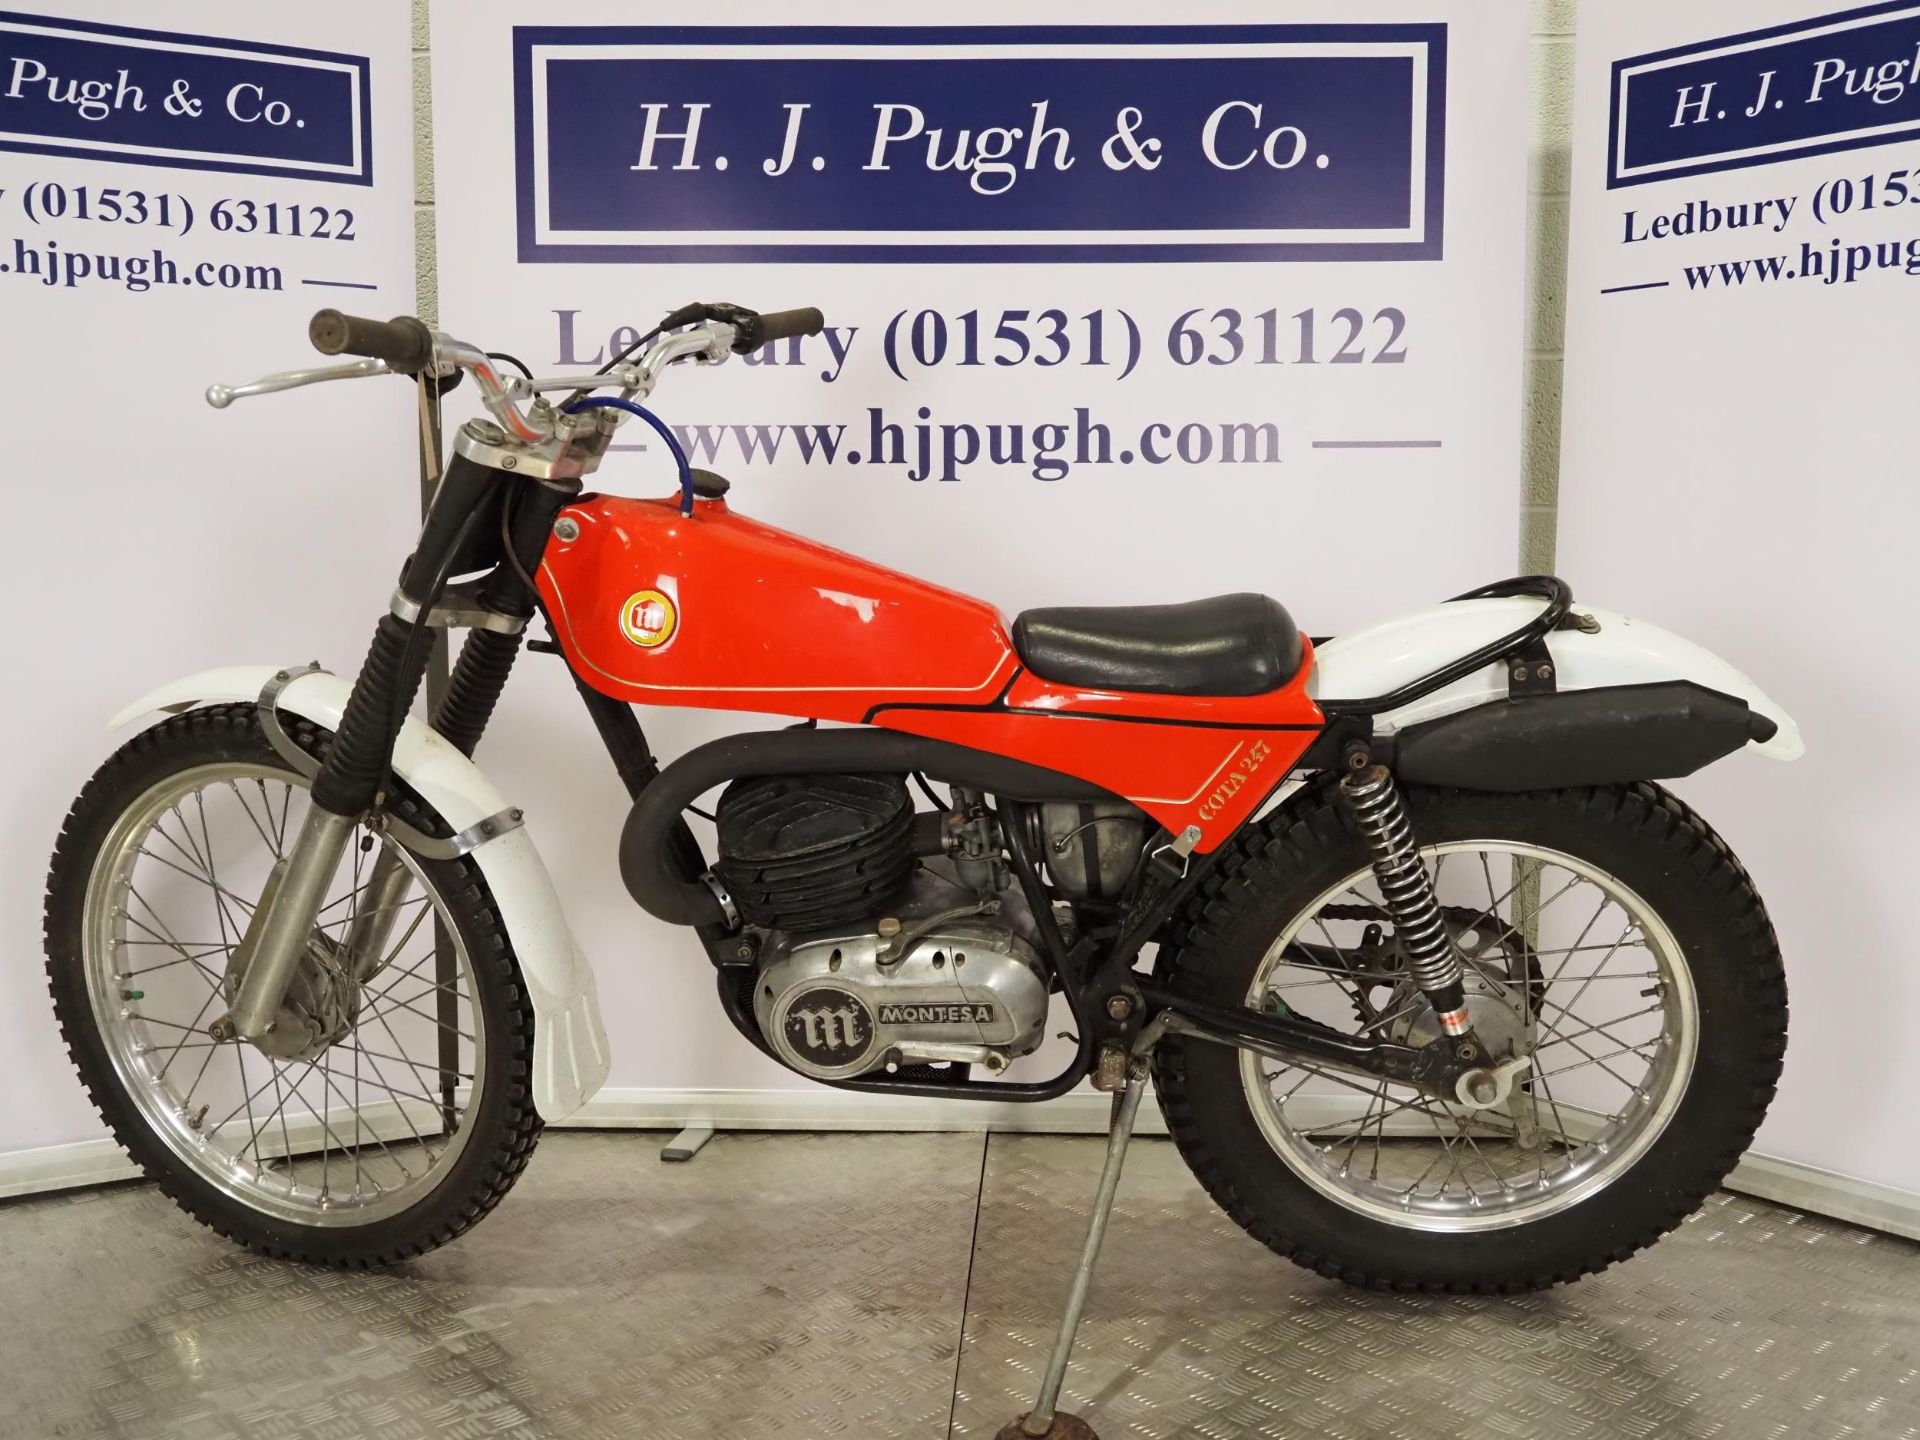 Montesa Cota 247 trials motorcycle. 1971. 247cc Engine No. 21M25917 Engine turns over. Has been - Image 6 of 6